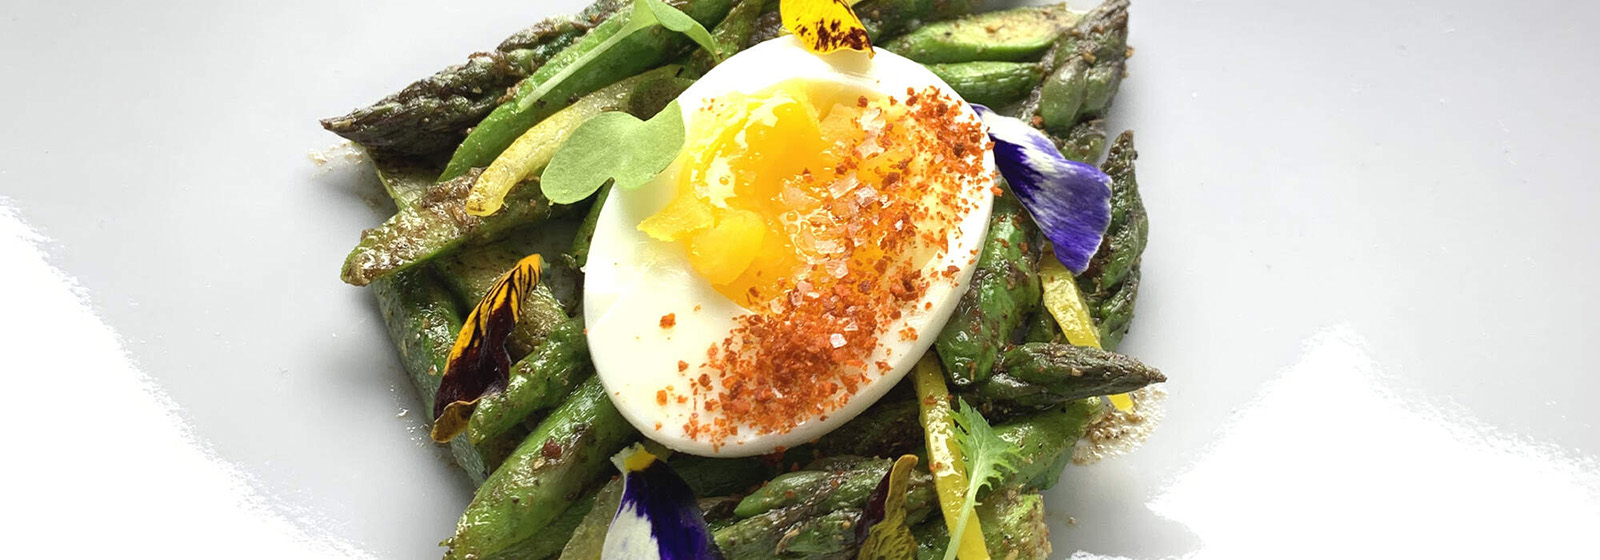 Hard boiled egg on a bed of asparagus